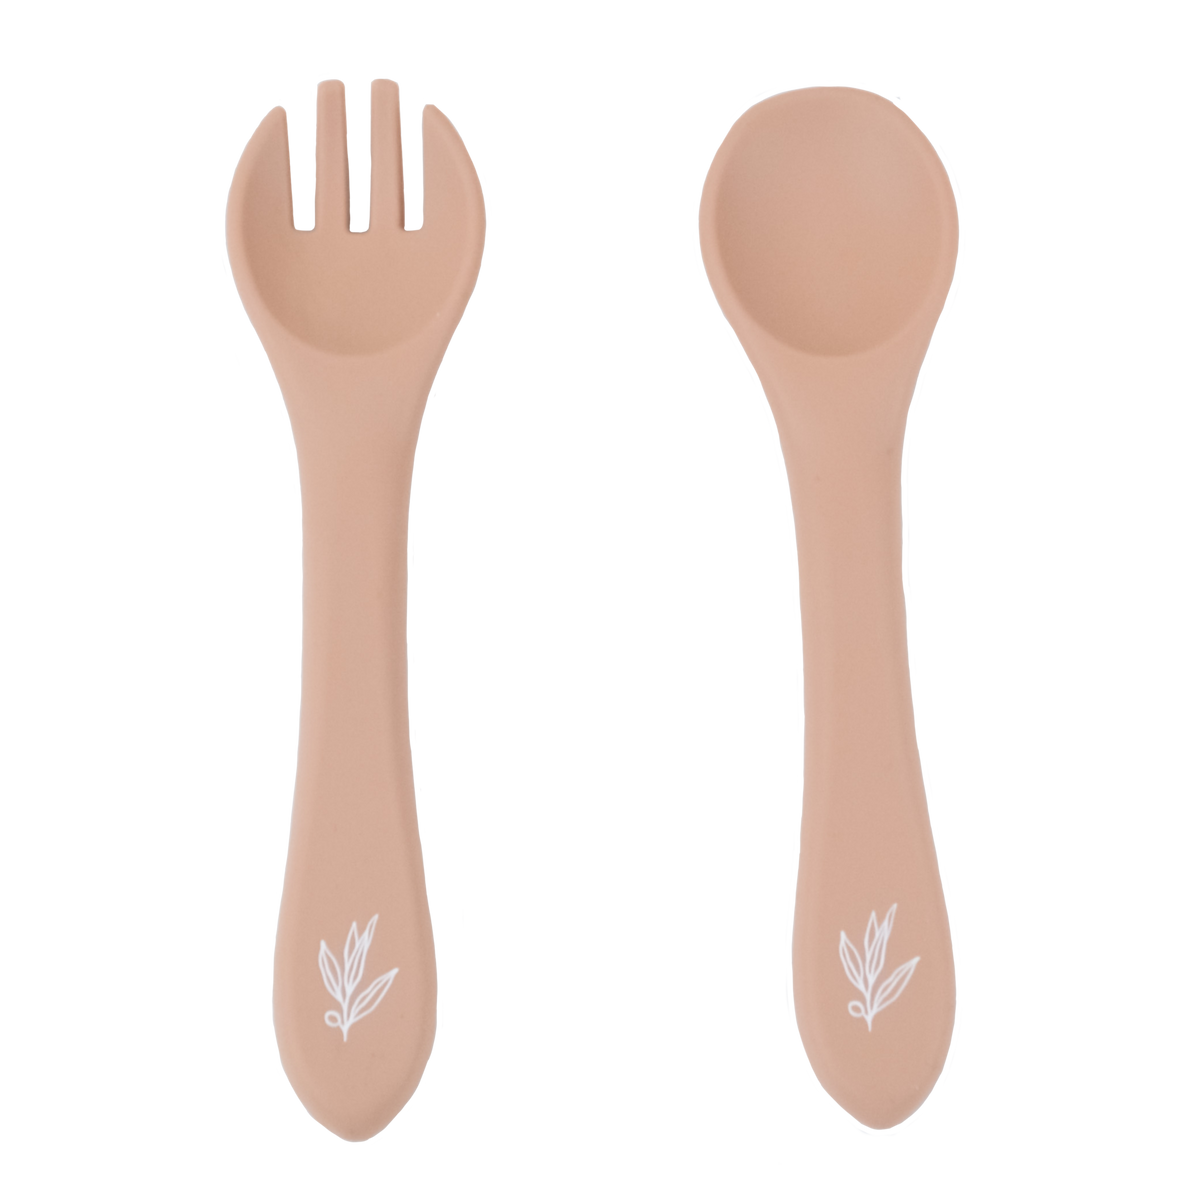 Beloved Child Co. - Spoon and Fork Set | Sunset Coral